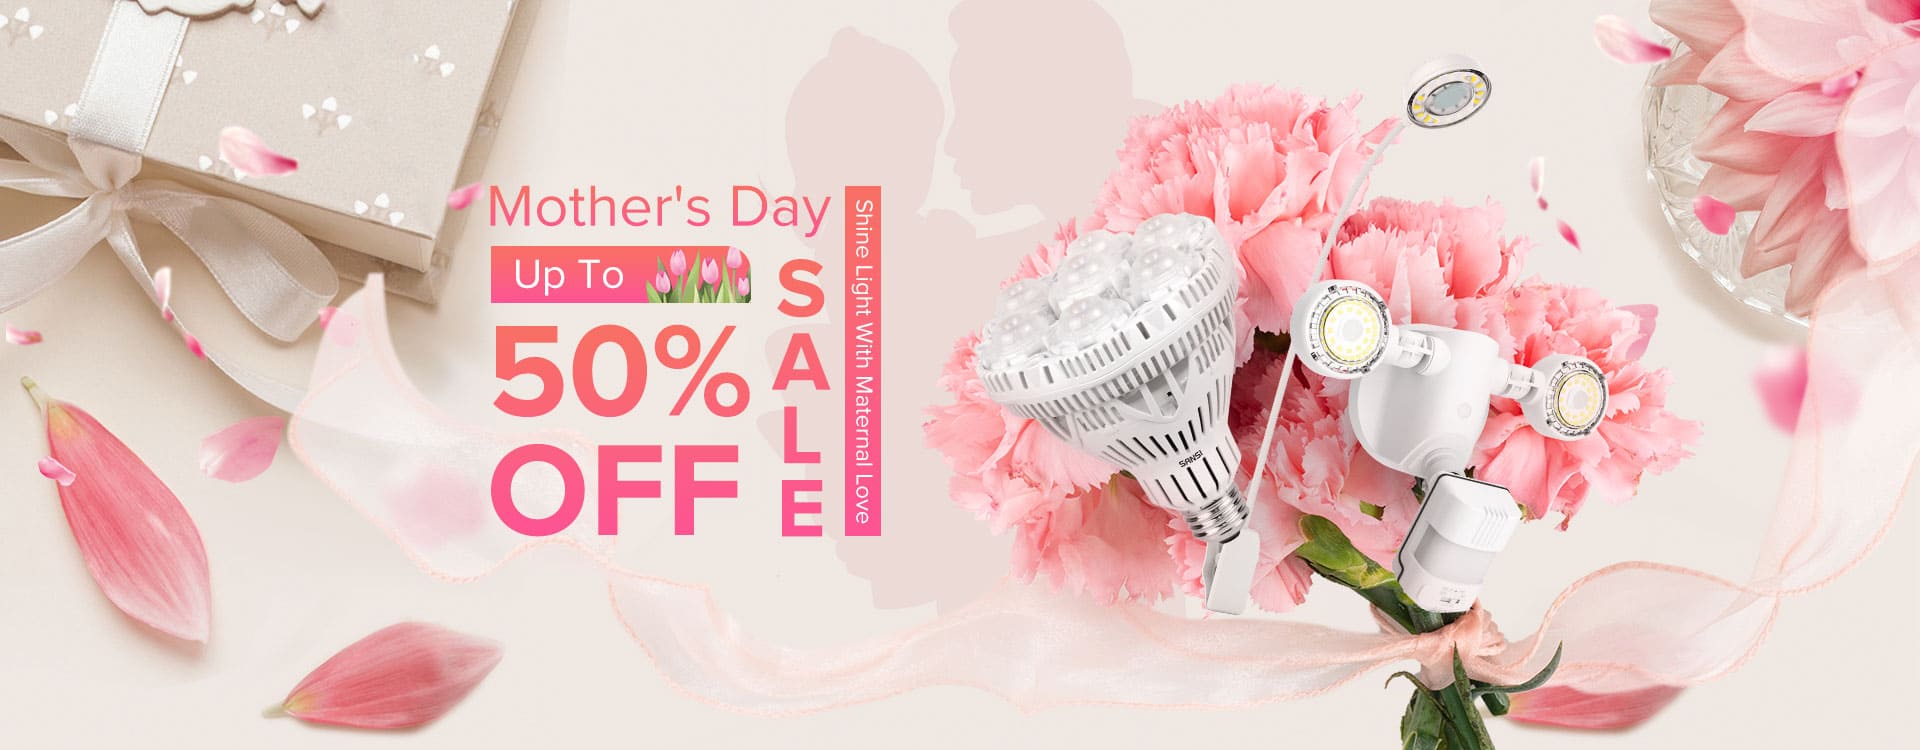 Mother's Day Sale,Up to 50% off!